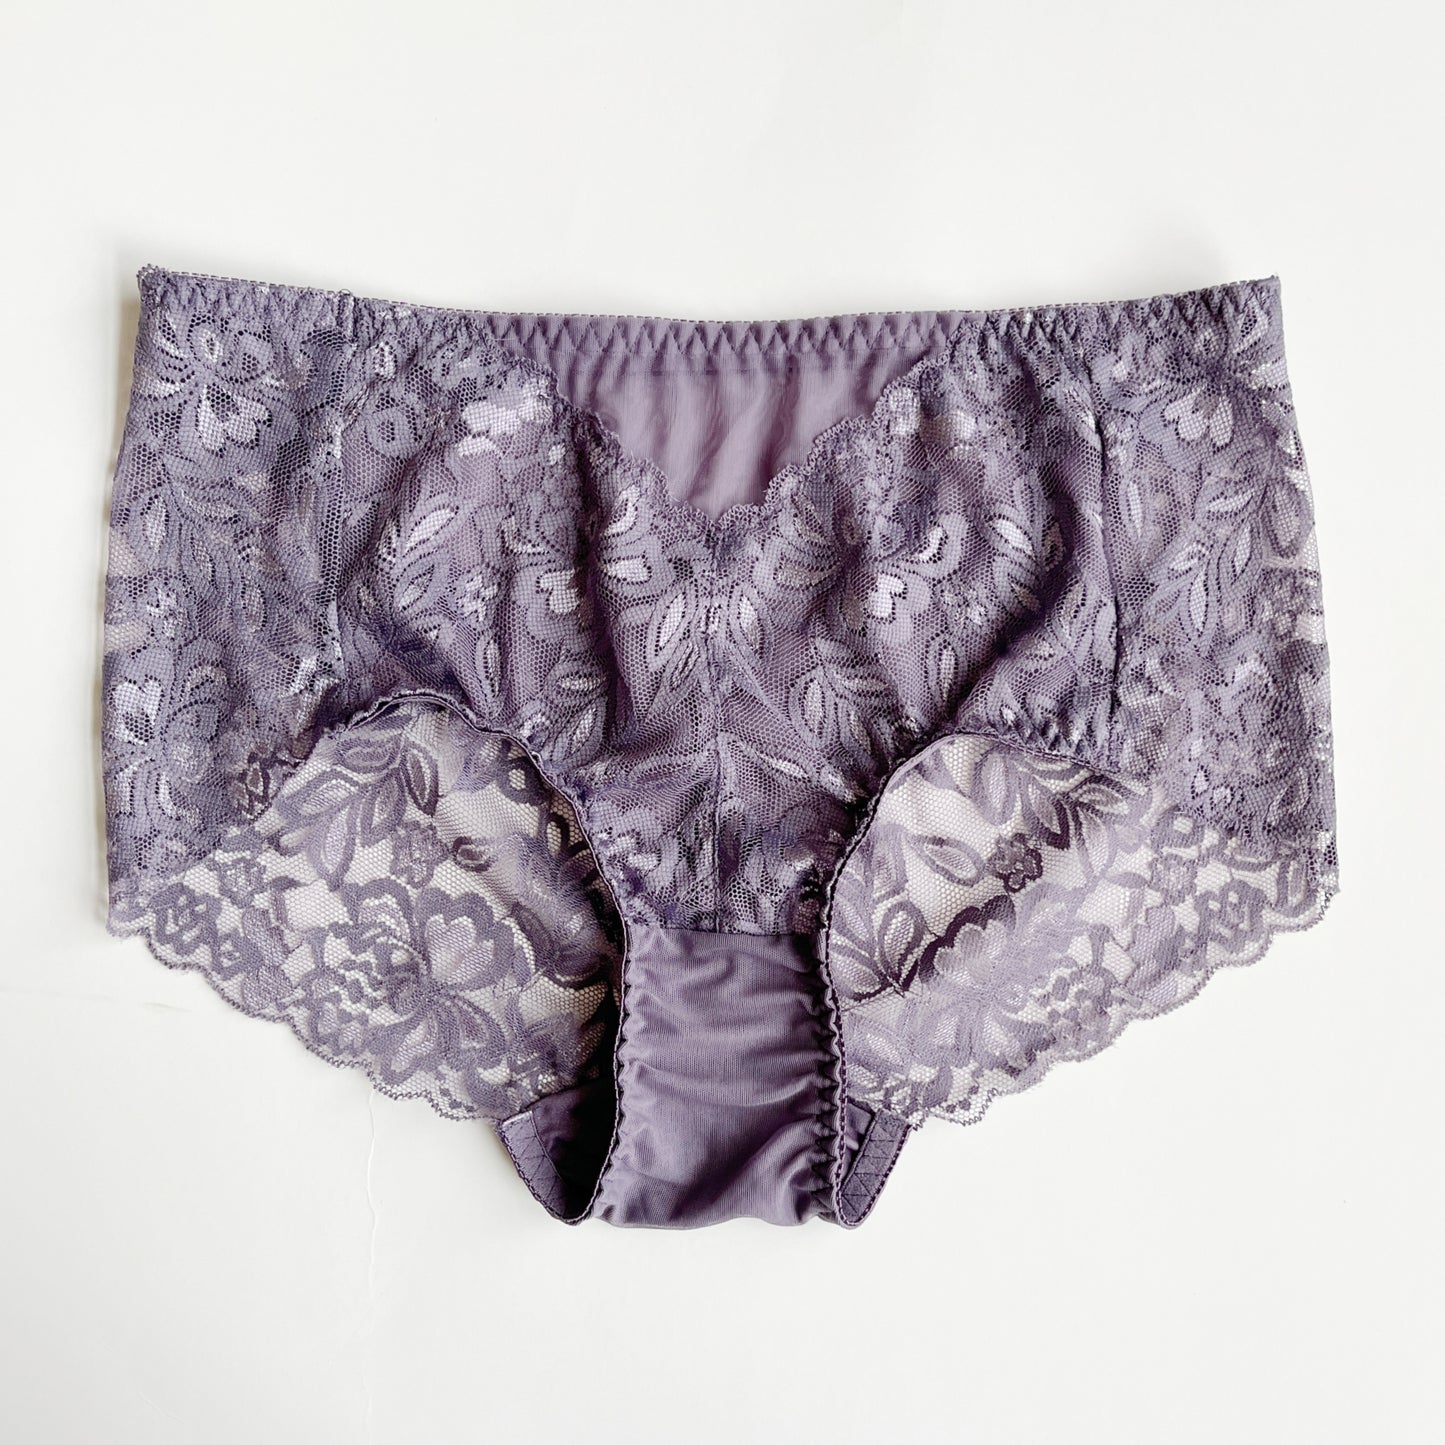 mauve silk panties high waist | Made in Canada scalloped lace underwear 